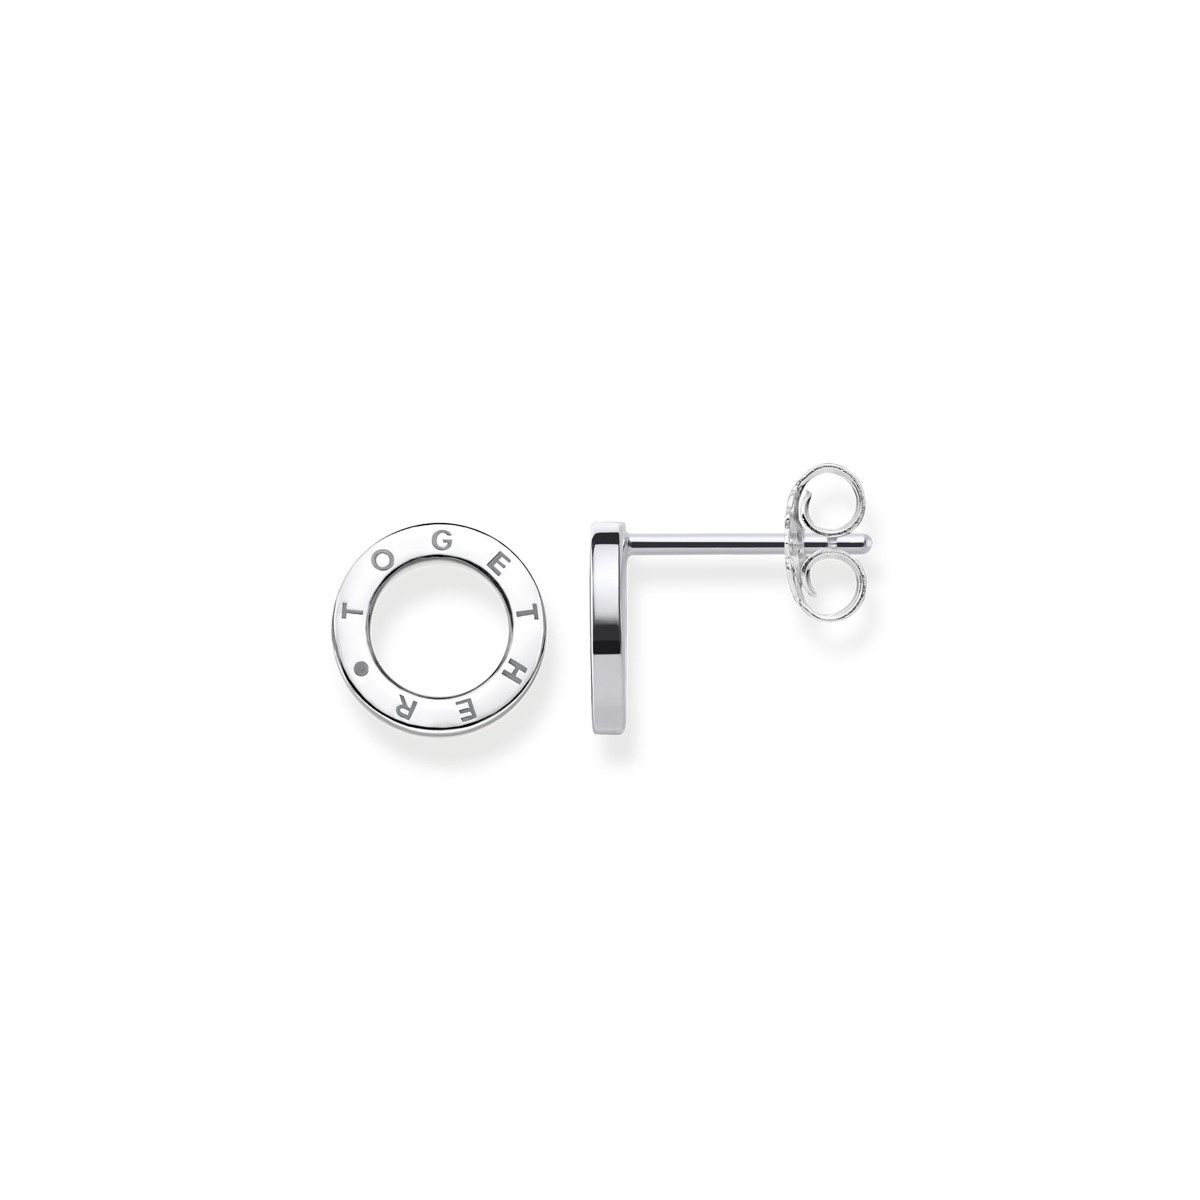 Thomas Sabo 'Circles Together' Stud Earrings - Silver H1946-001-12 